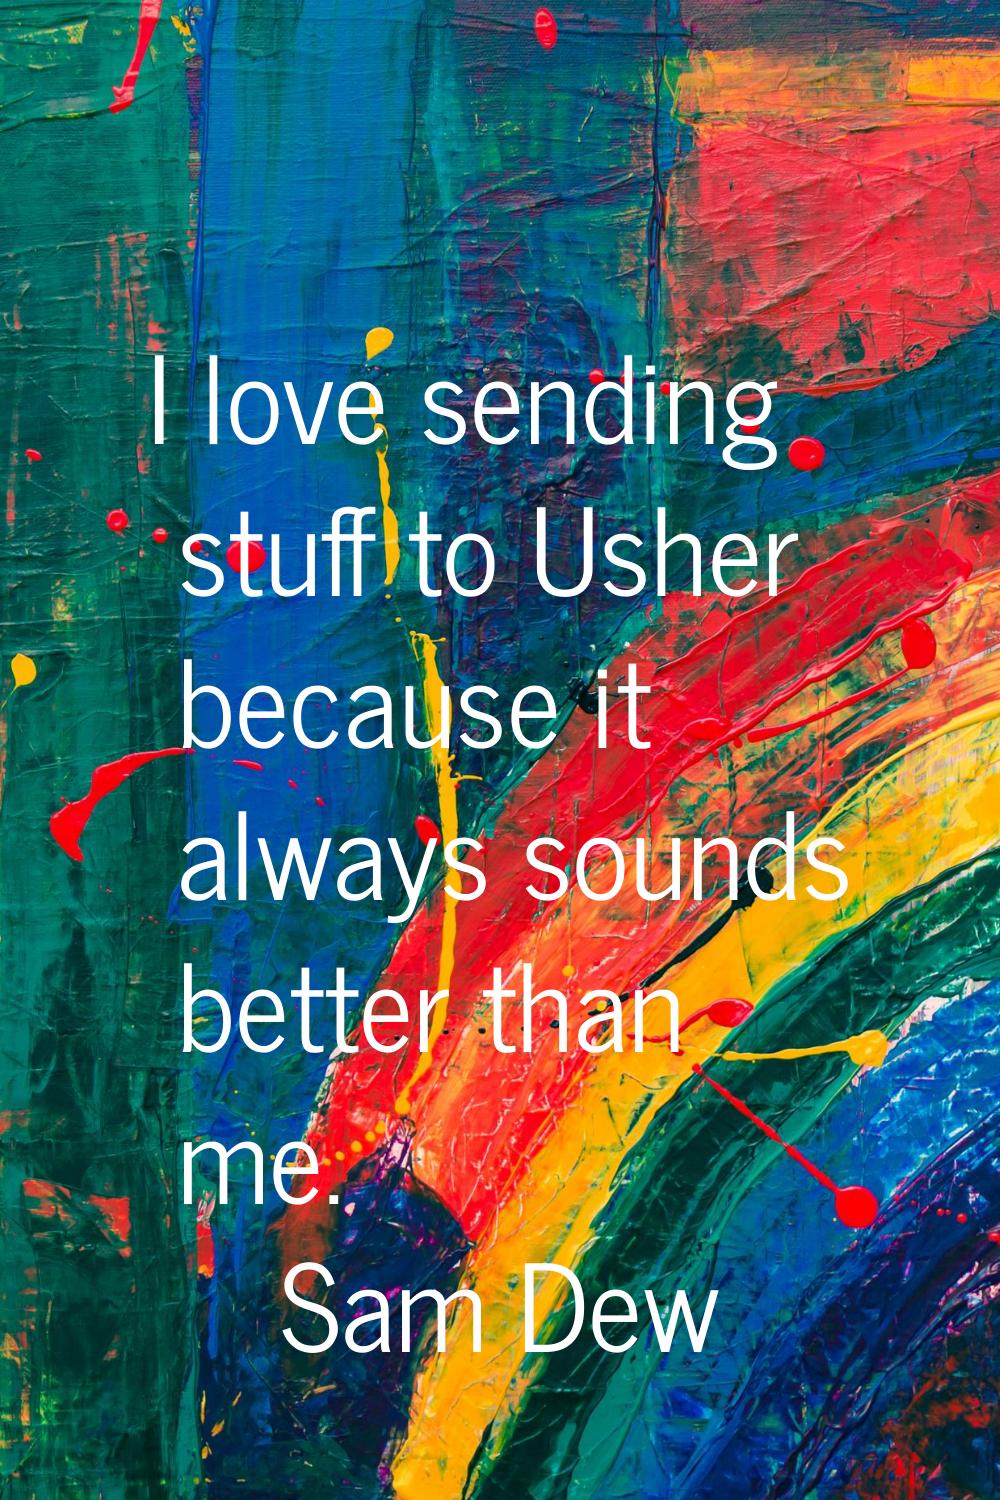 I love sending stuff to Usher because it always sounds better than me.